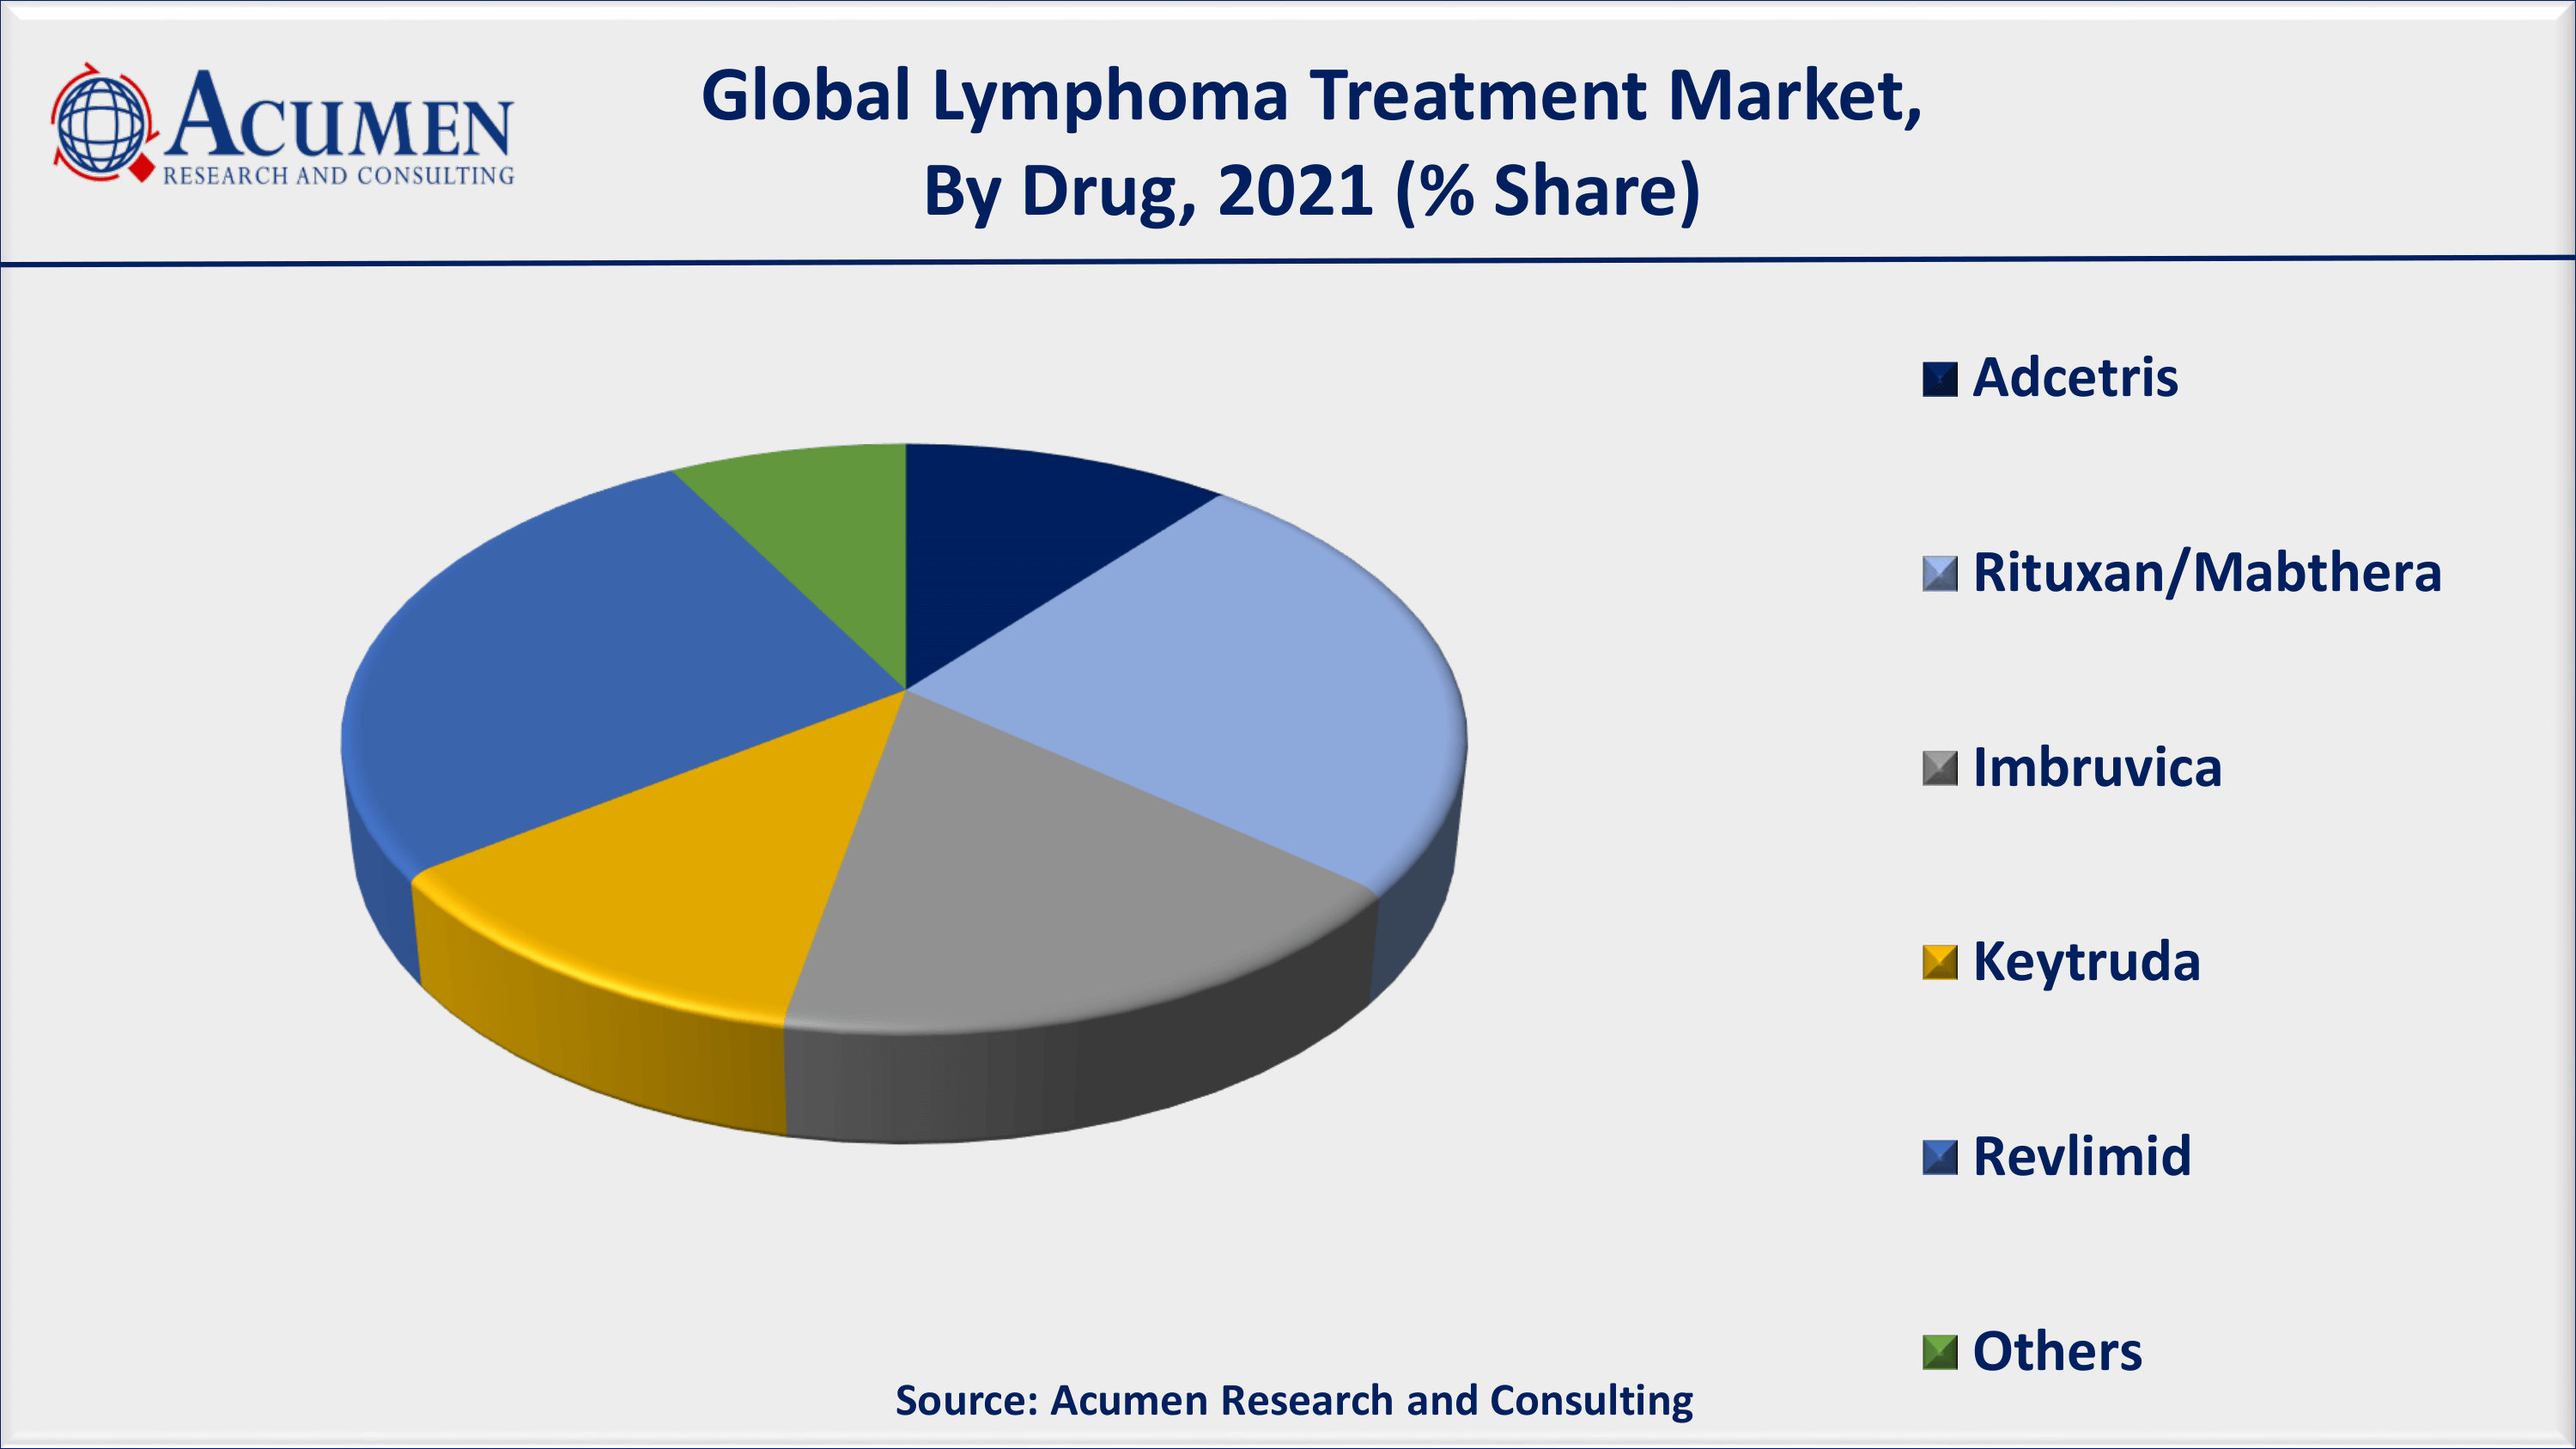 According to the Leukemia & Lymphoma Society® (LLS), around 178,520 Americans were diagnosed with Lymphoma in 2020